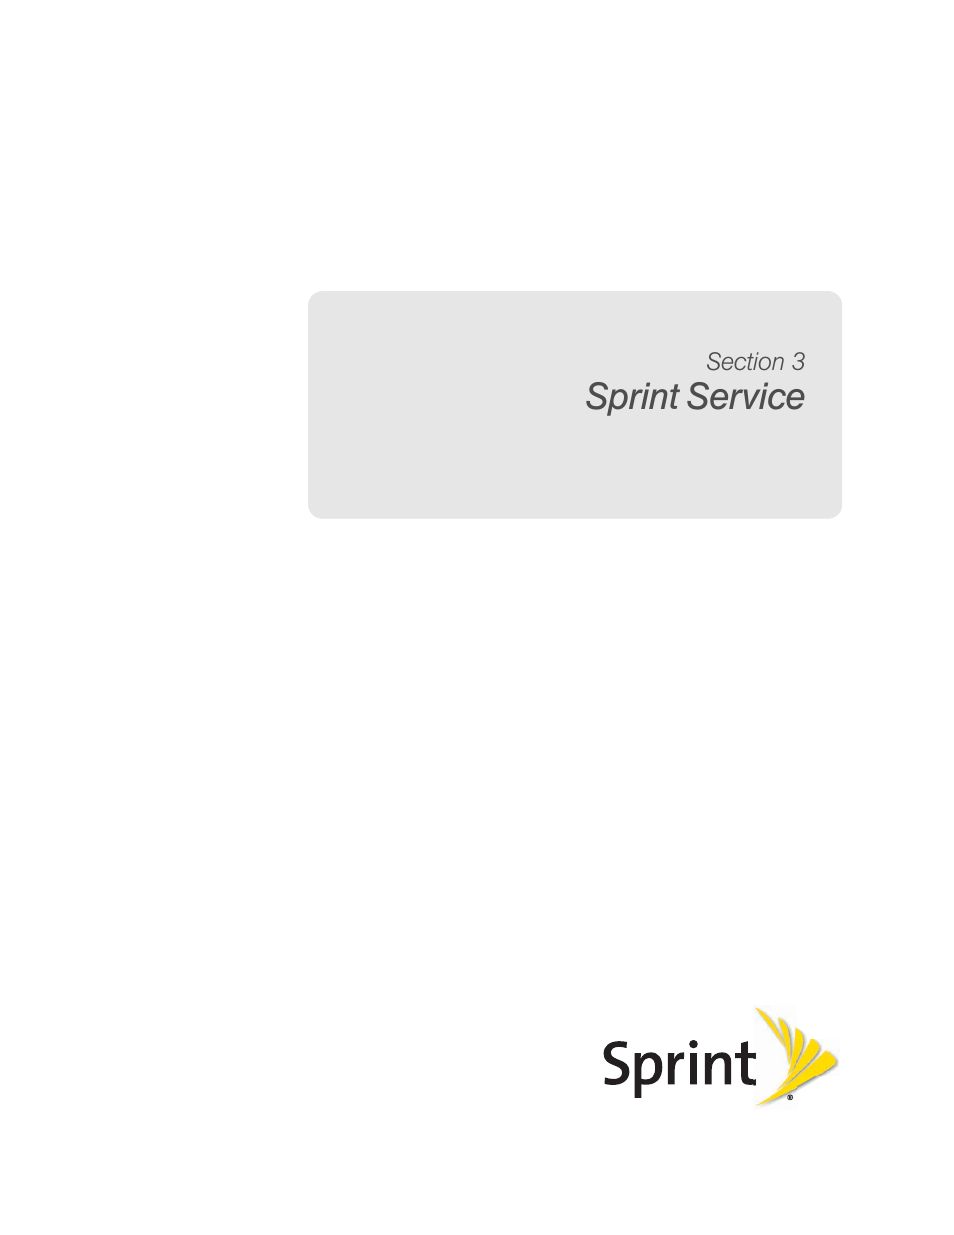 Sprint service, Section 3: sprint service | HTC EVO 4G User Manual | Page 109 / 197